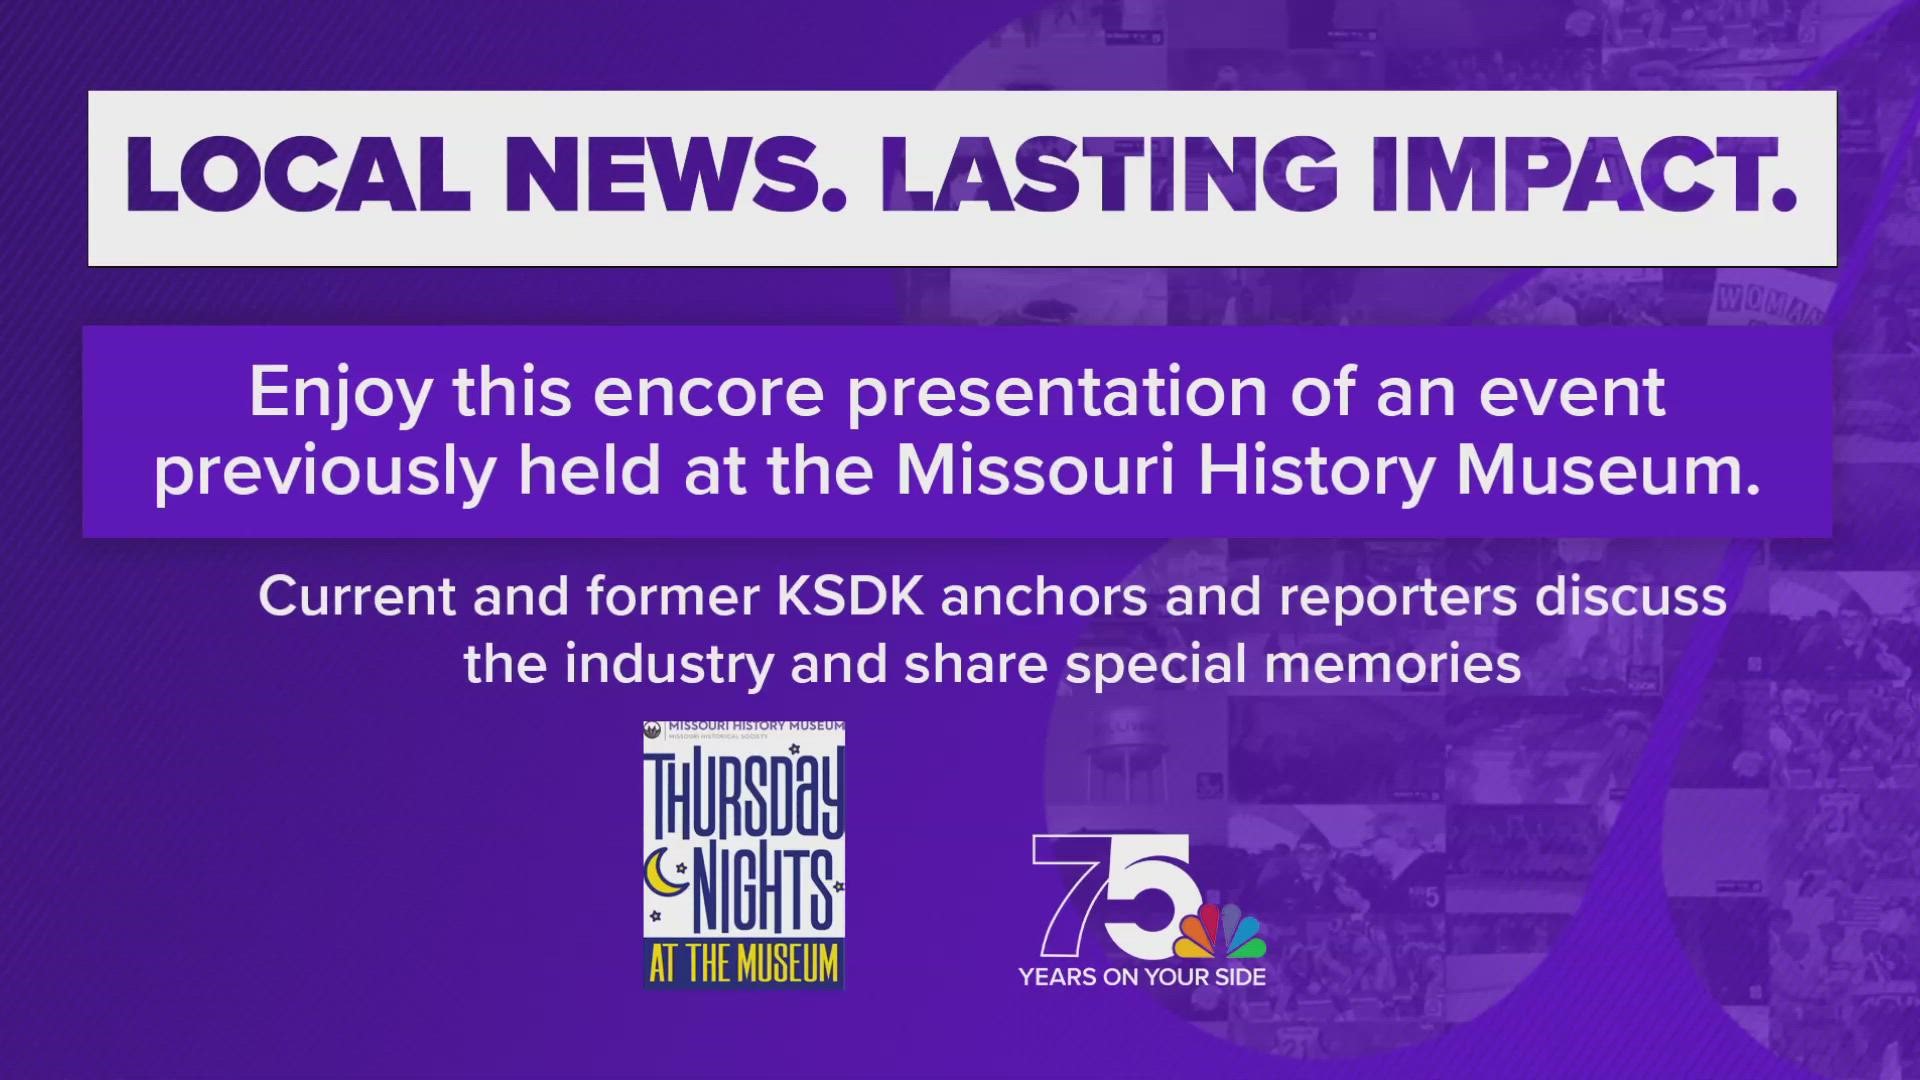 Former and current KSDK anchors and reporters swapped stories on a panel at the Missouri History Museum.